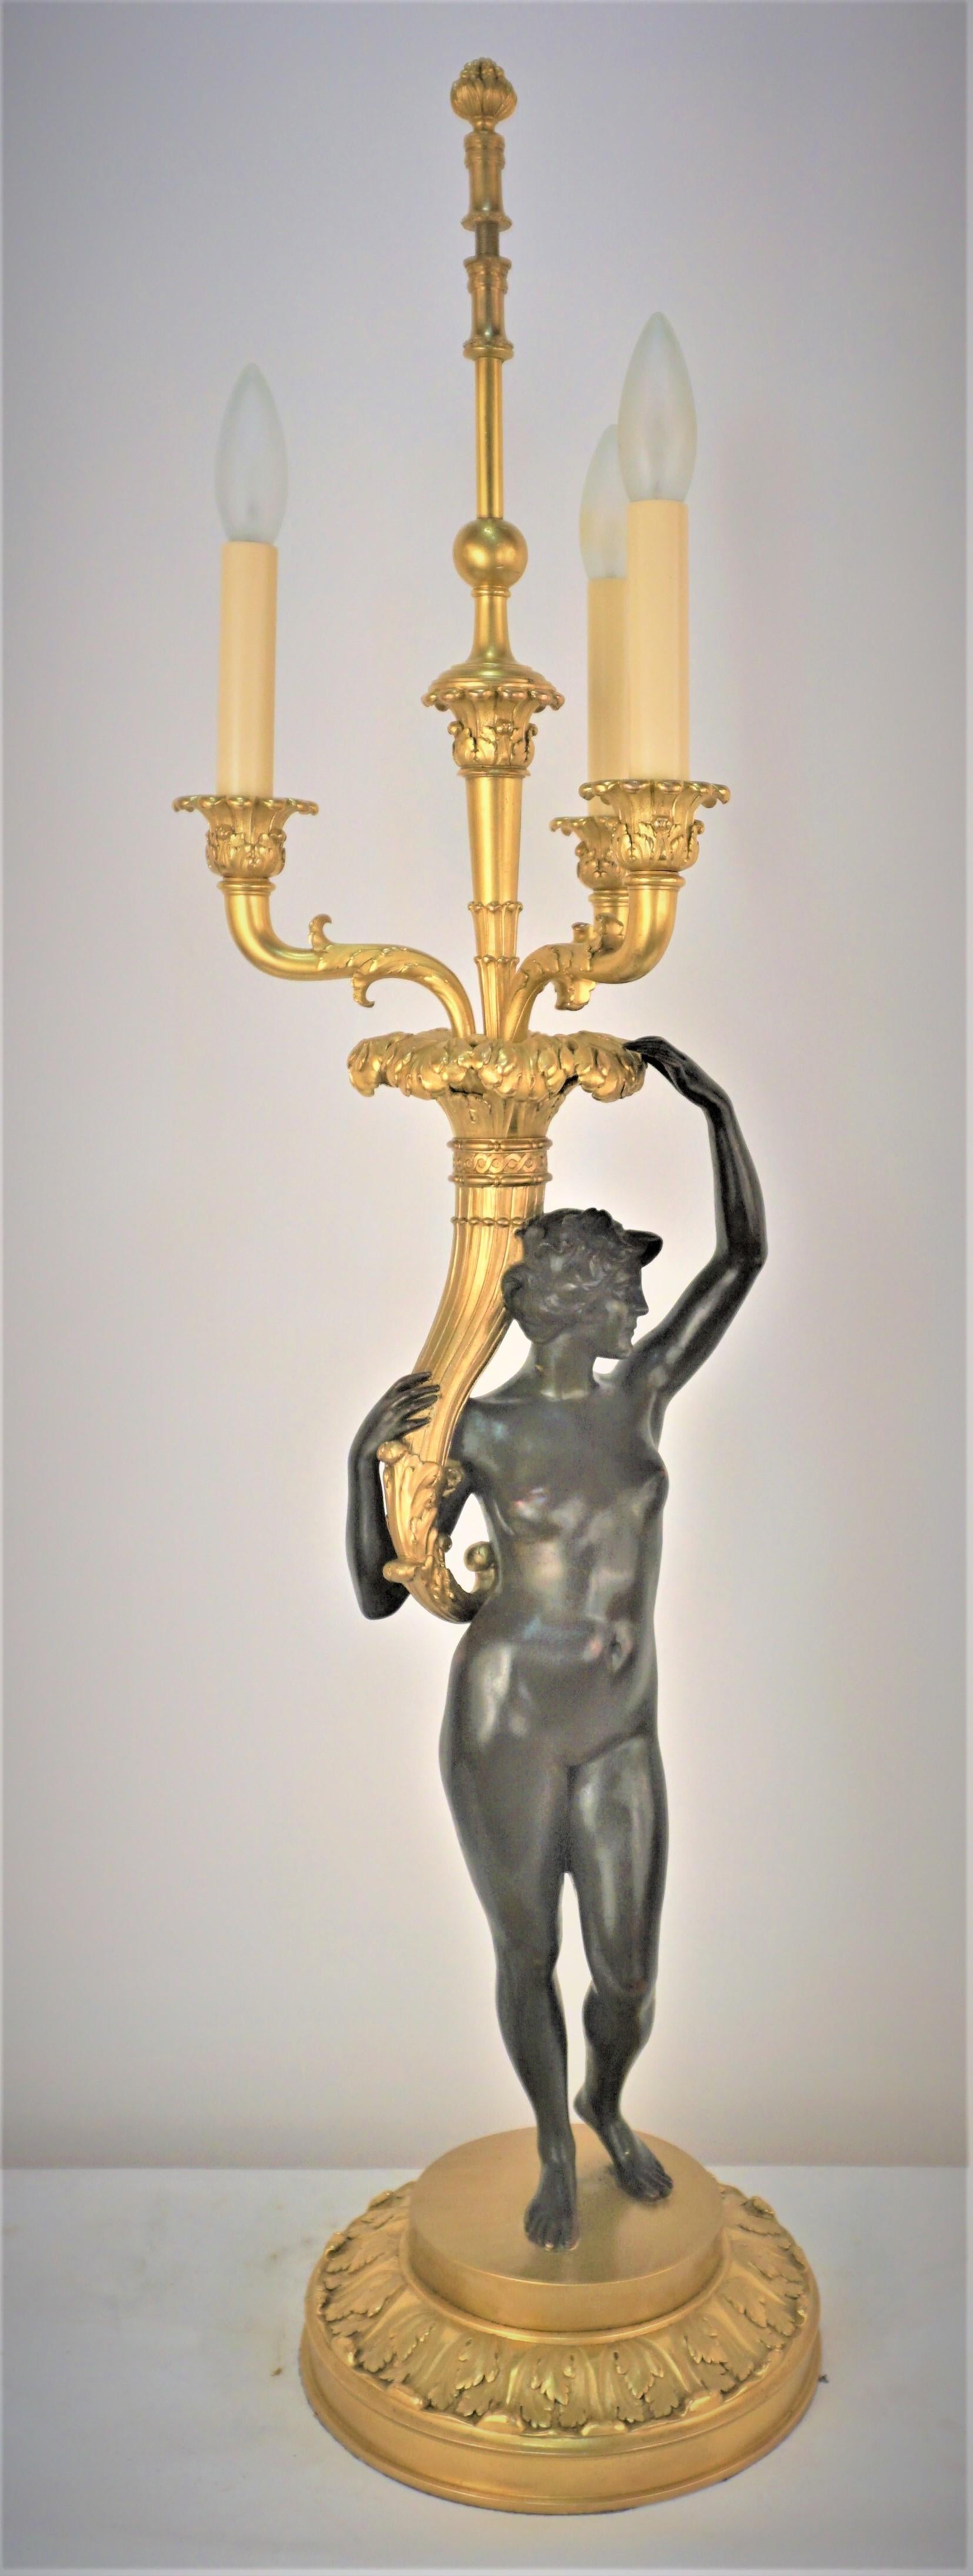 Early 20th Century Gilt bronze Table Lamp For Sale 5